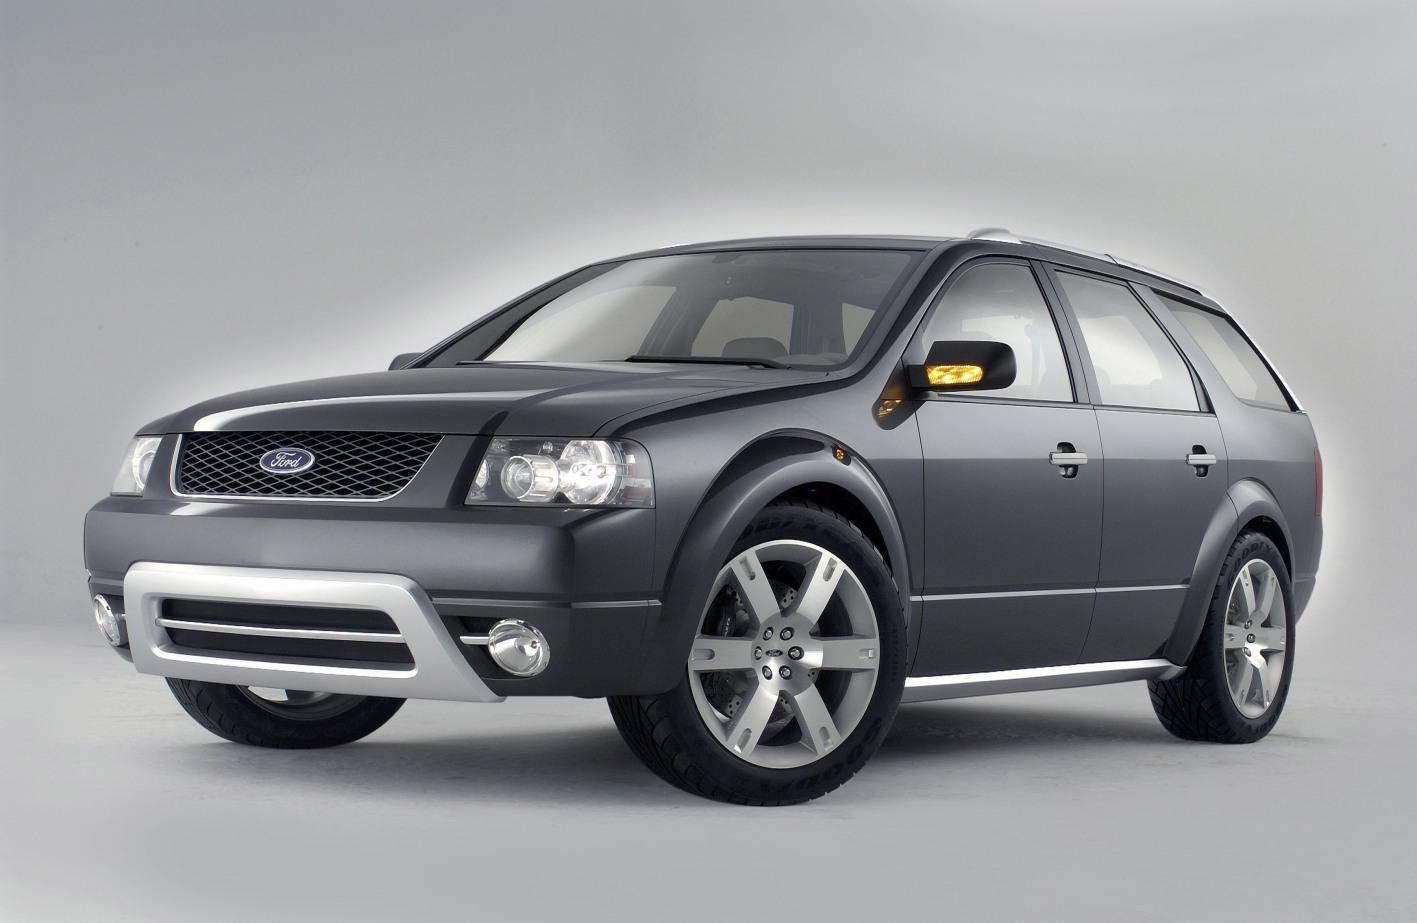 Ford Freestyle FX Concept Wallpaper [HD]